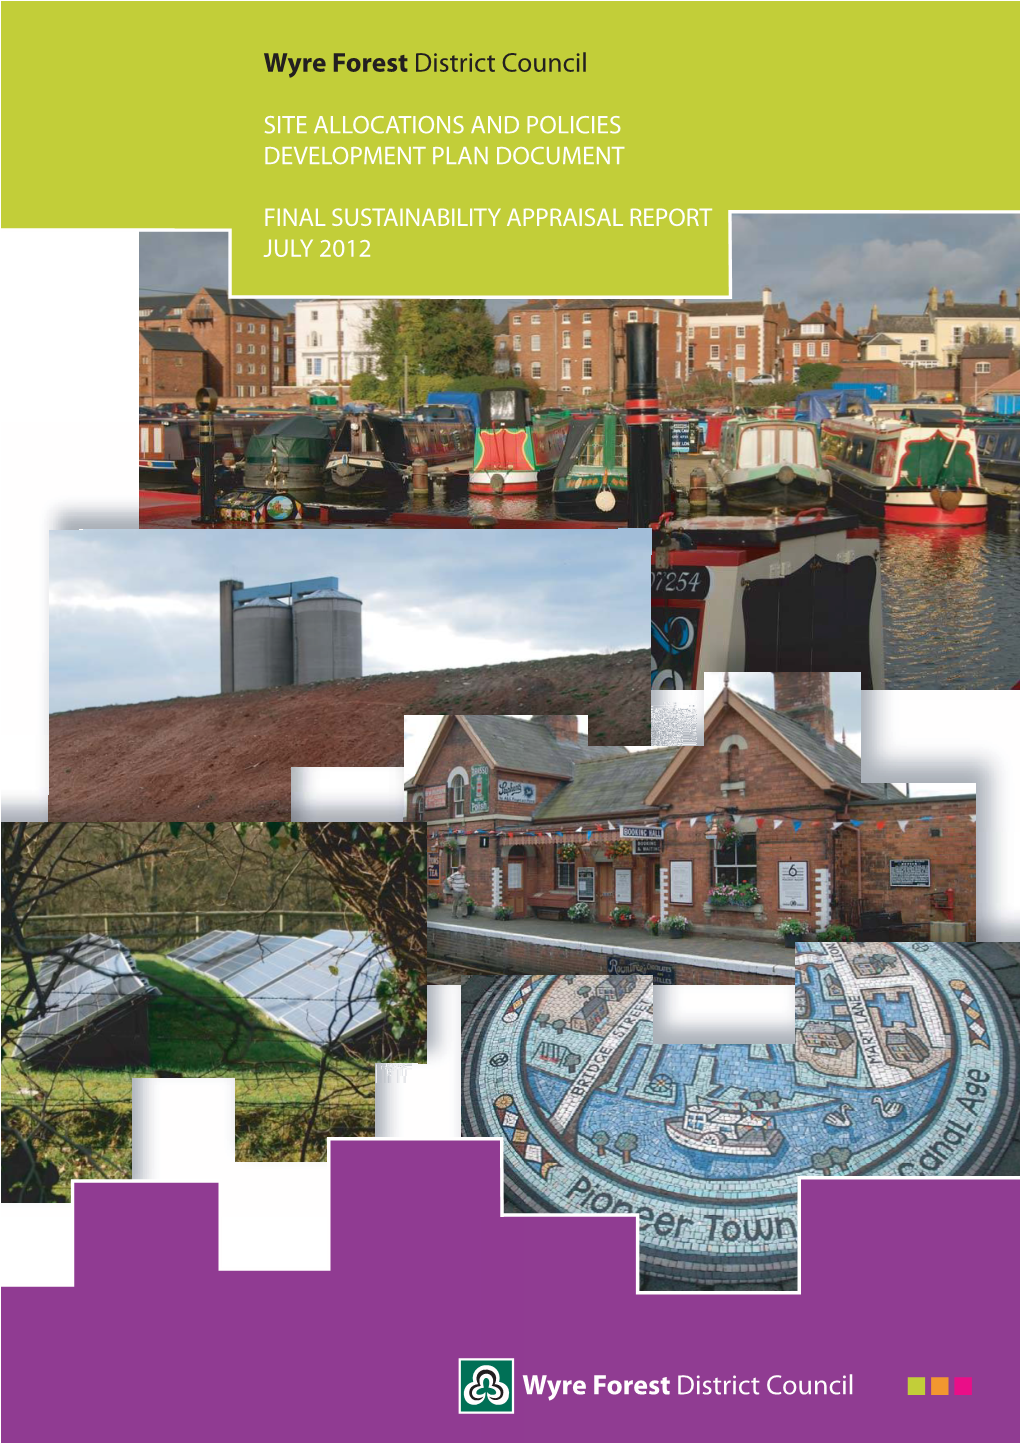 Site Allocations and Policies Final Sustainability Appraisal Report (July 2012) Contents